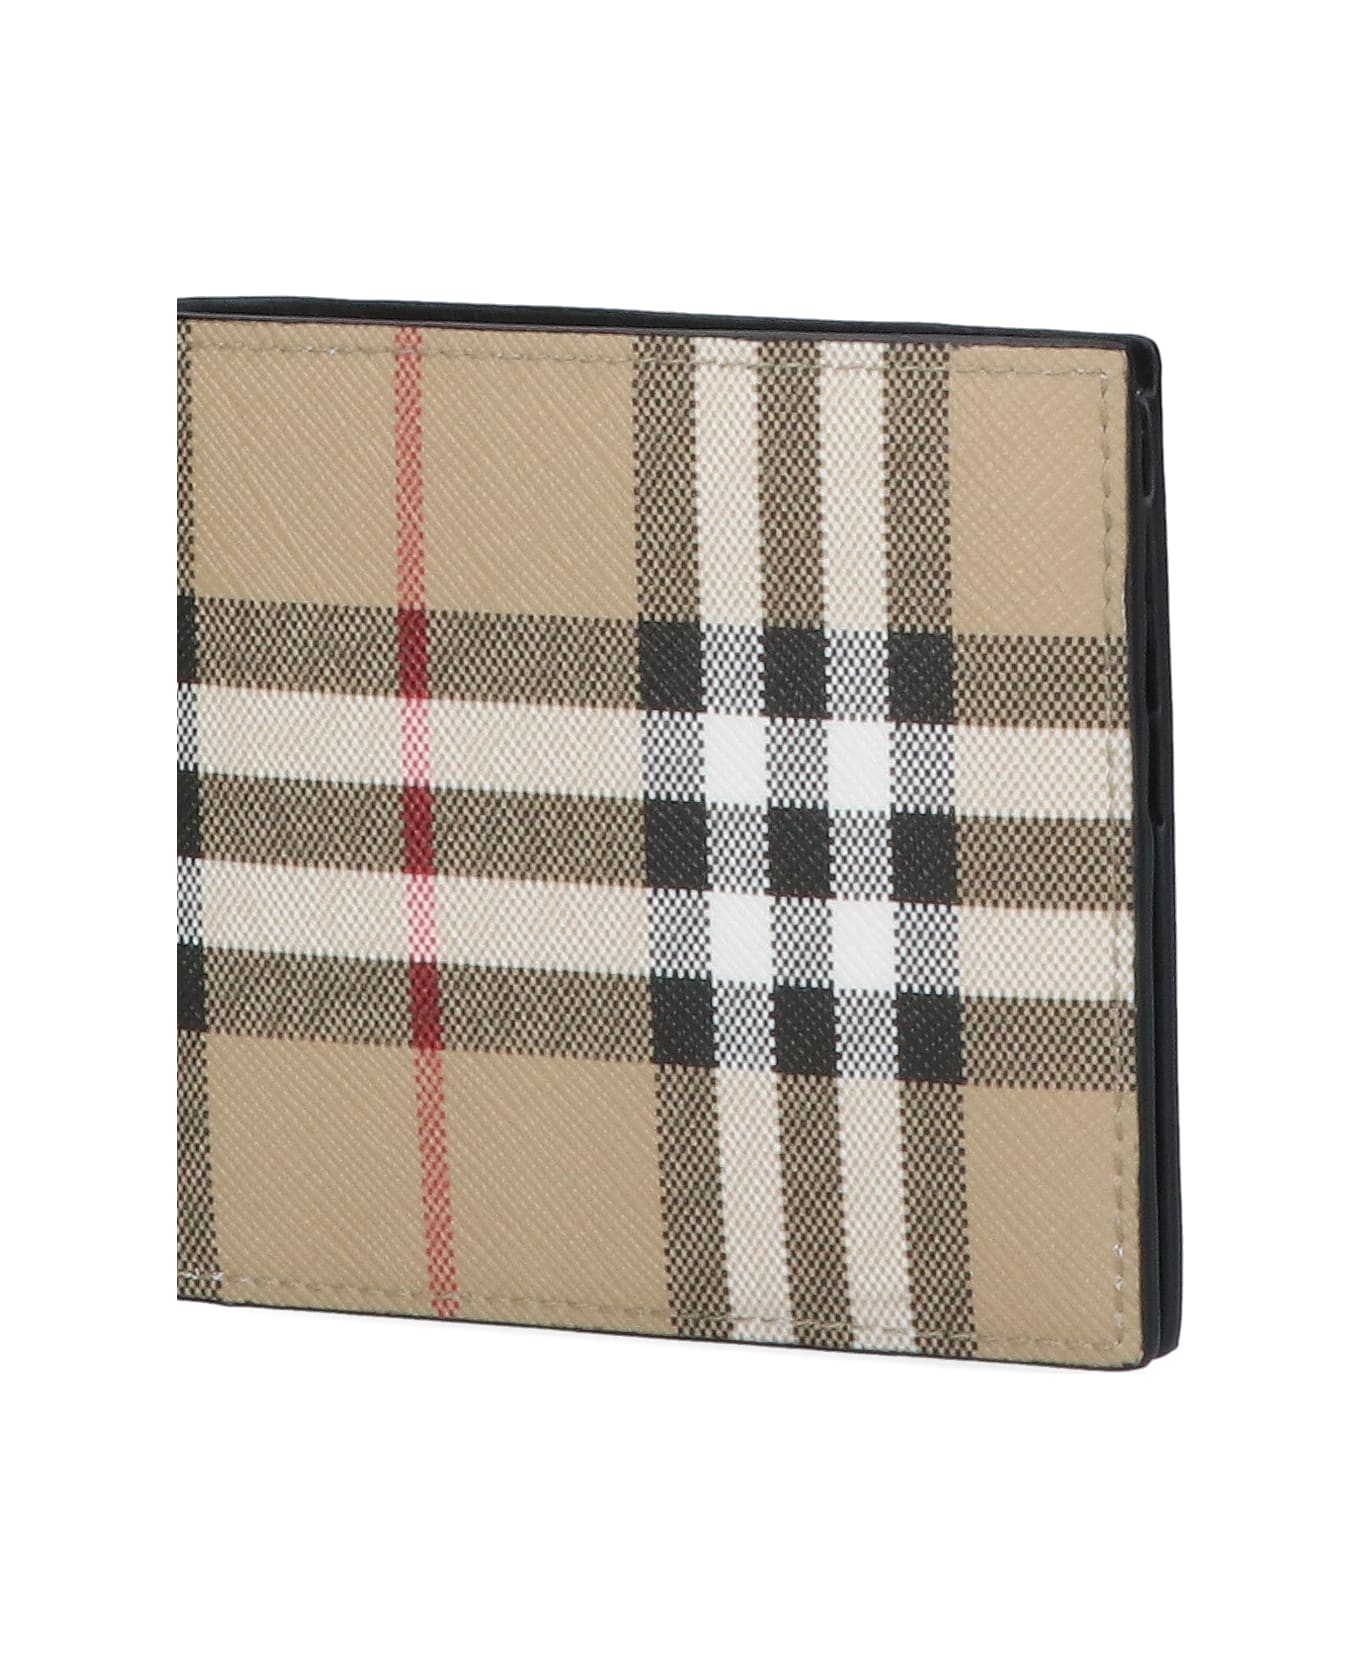 Burberry Printed E-canvas Wallet - Beige